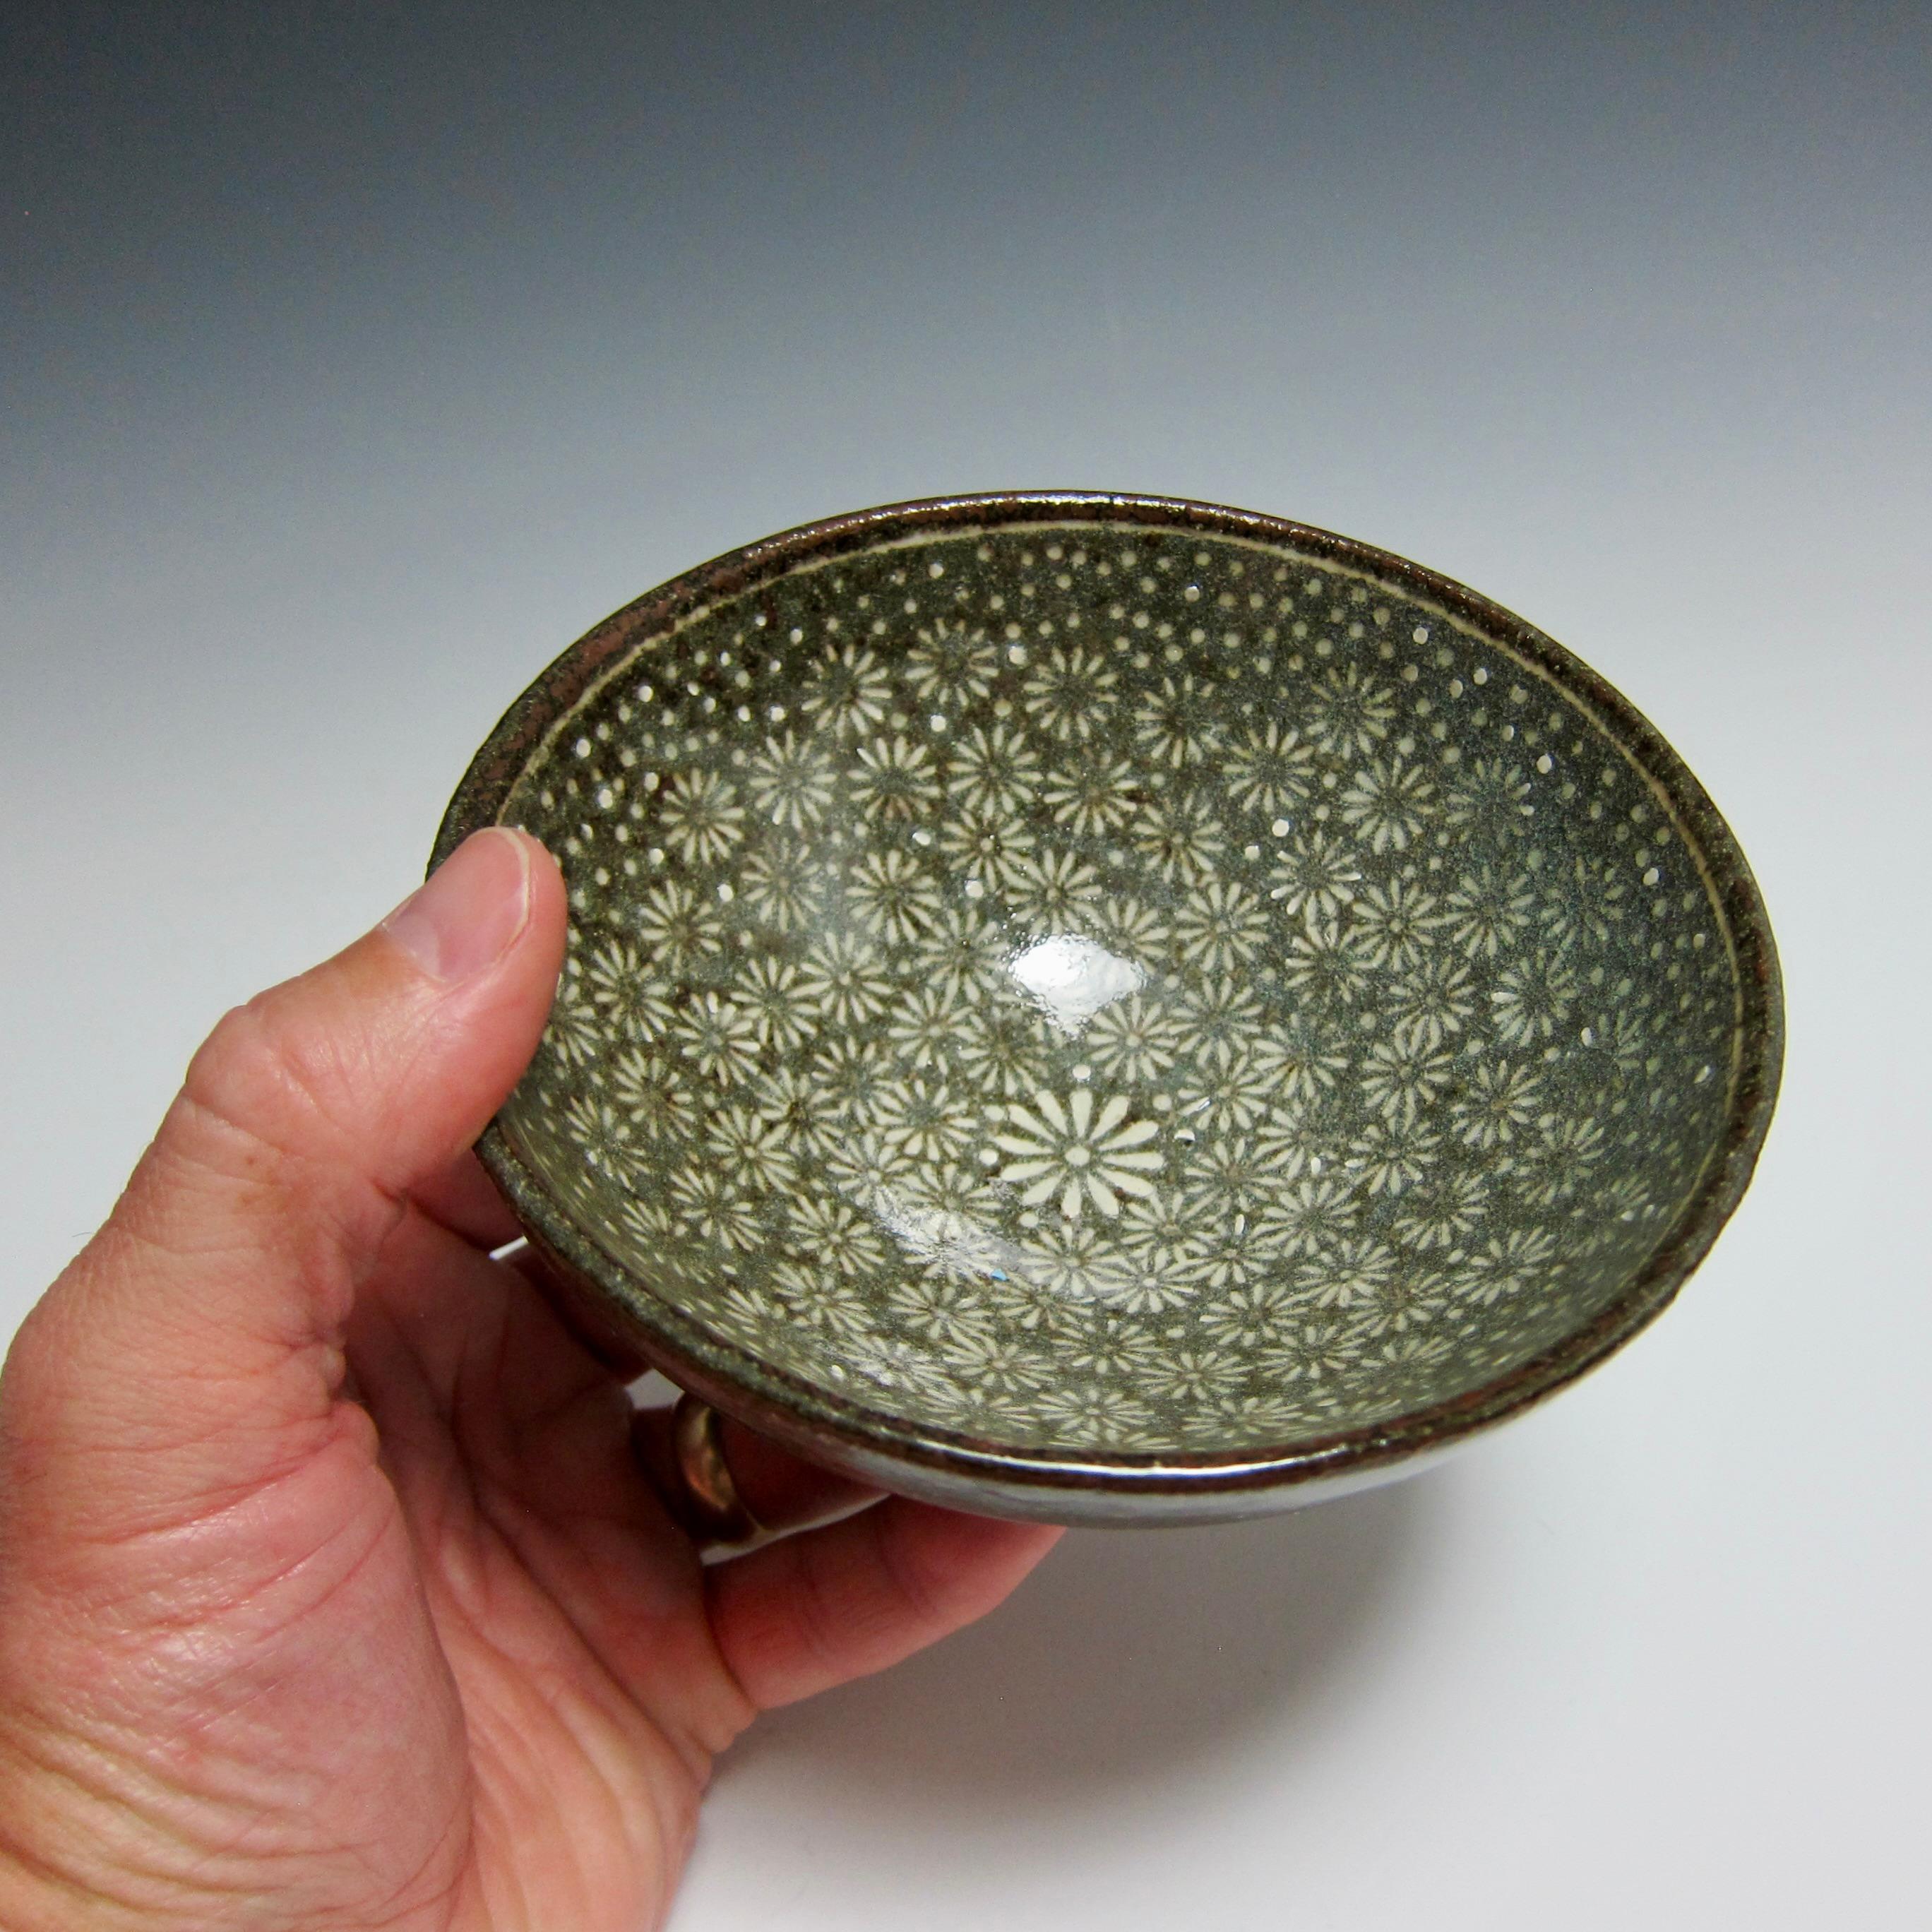 Decorative Buncheong Bowl by Jason Fox In New Condition For Sale In Burbank, CA